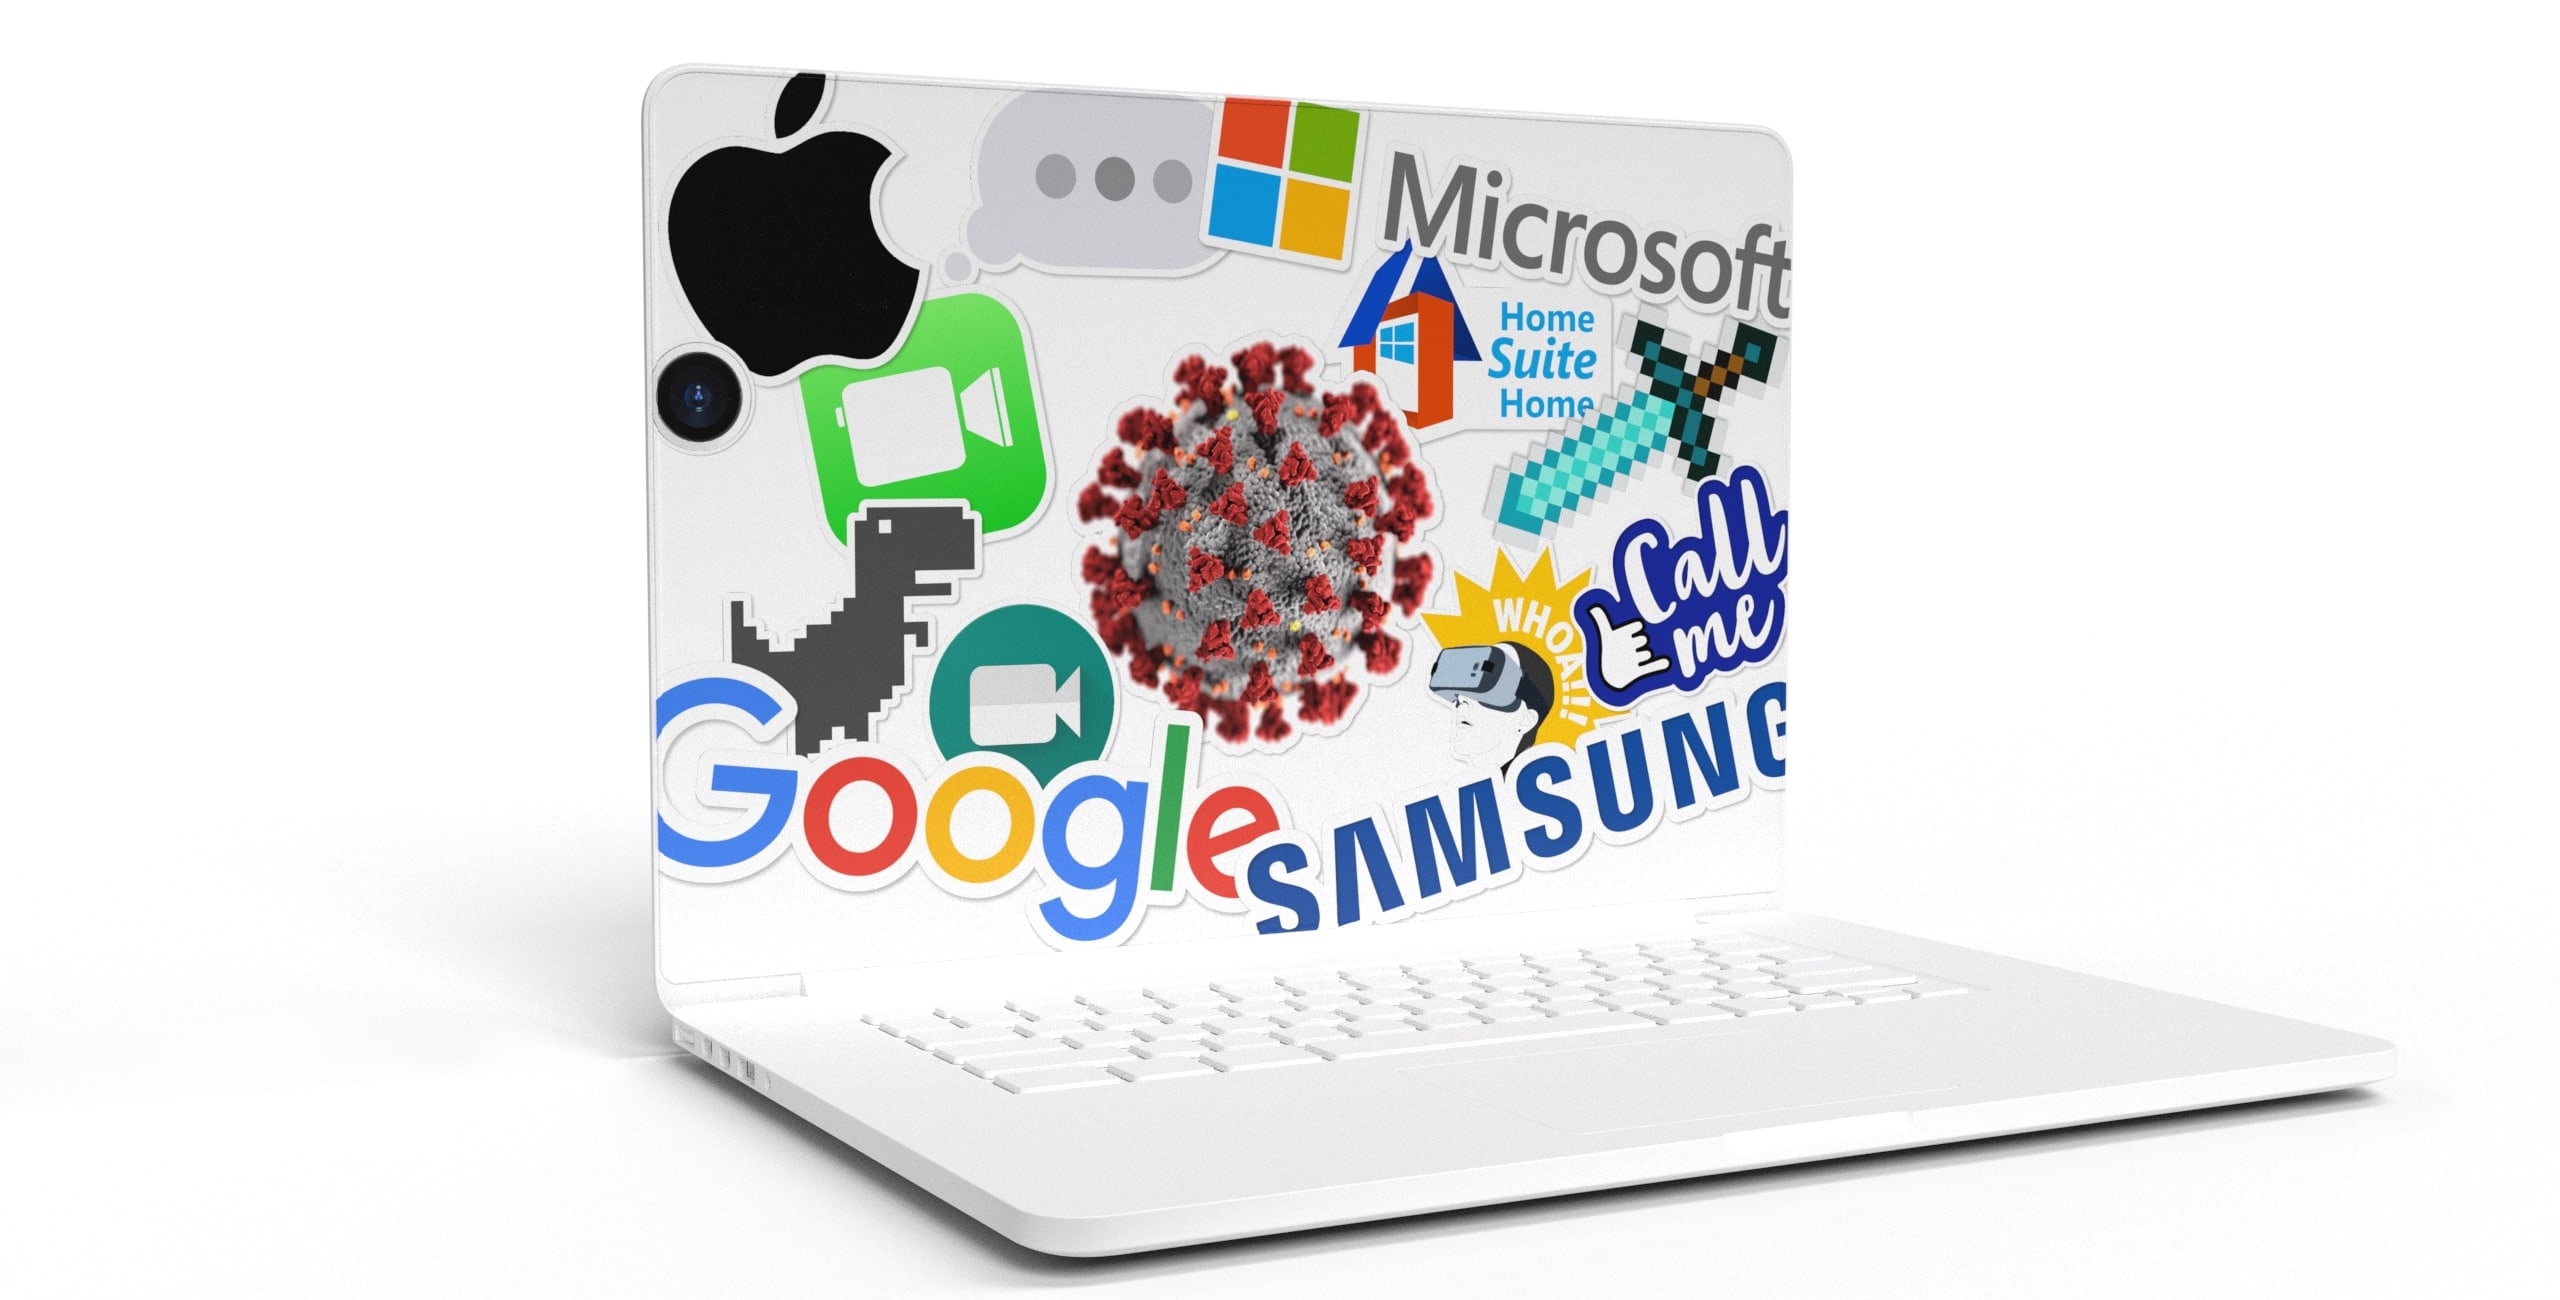 A laptop with microsoft, samsung and other logos on it.